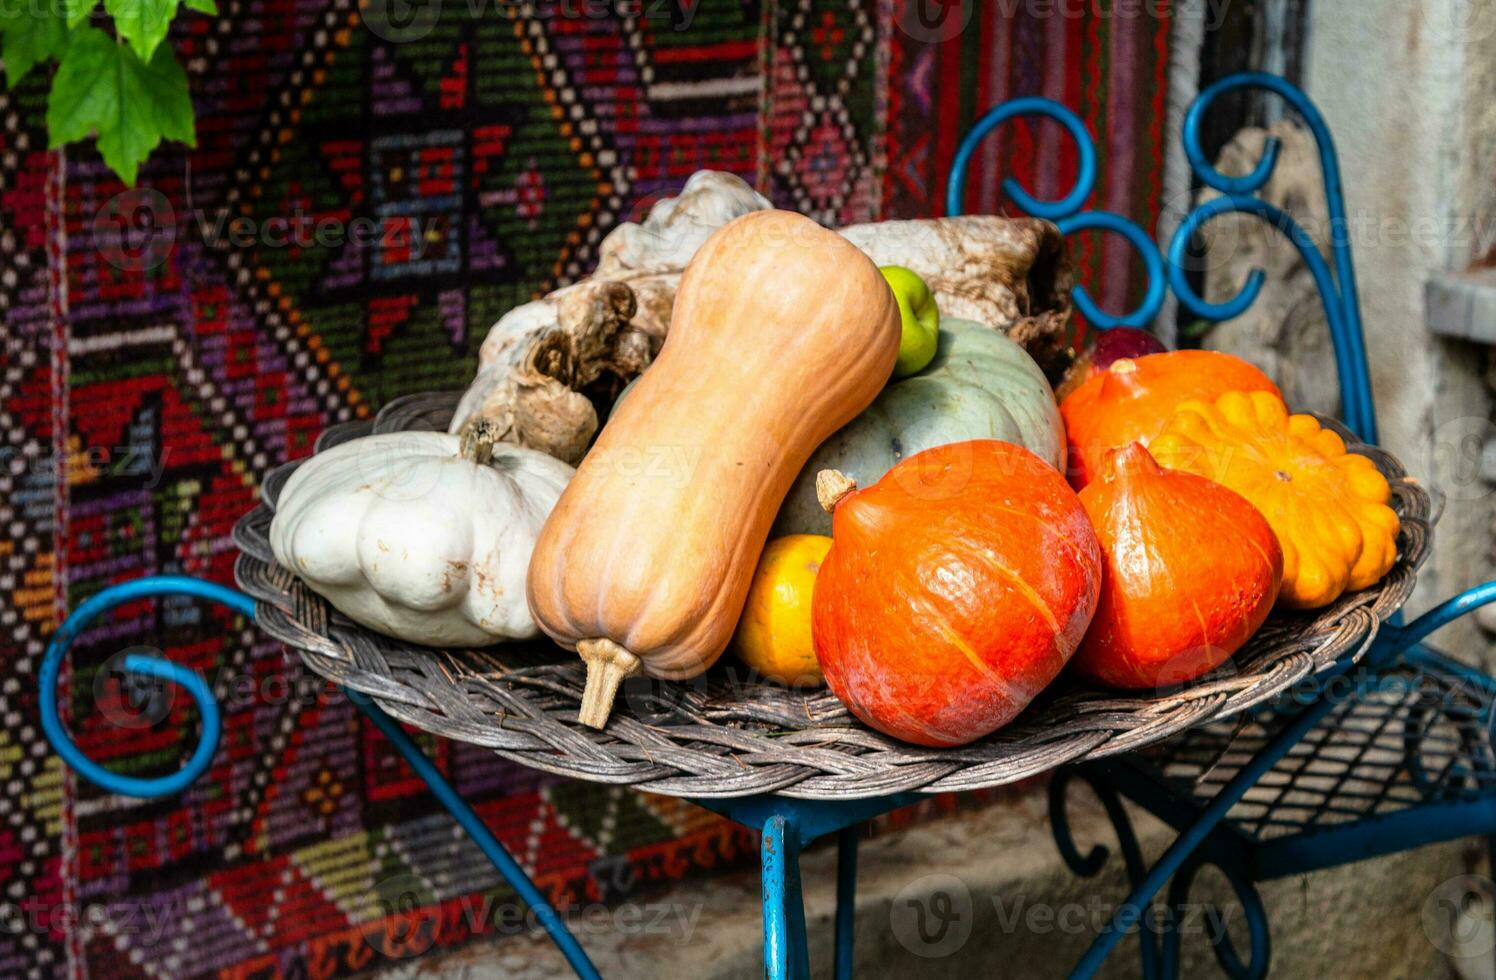 various pumpkins and squash on table in courtyard photo